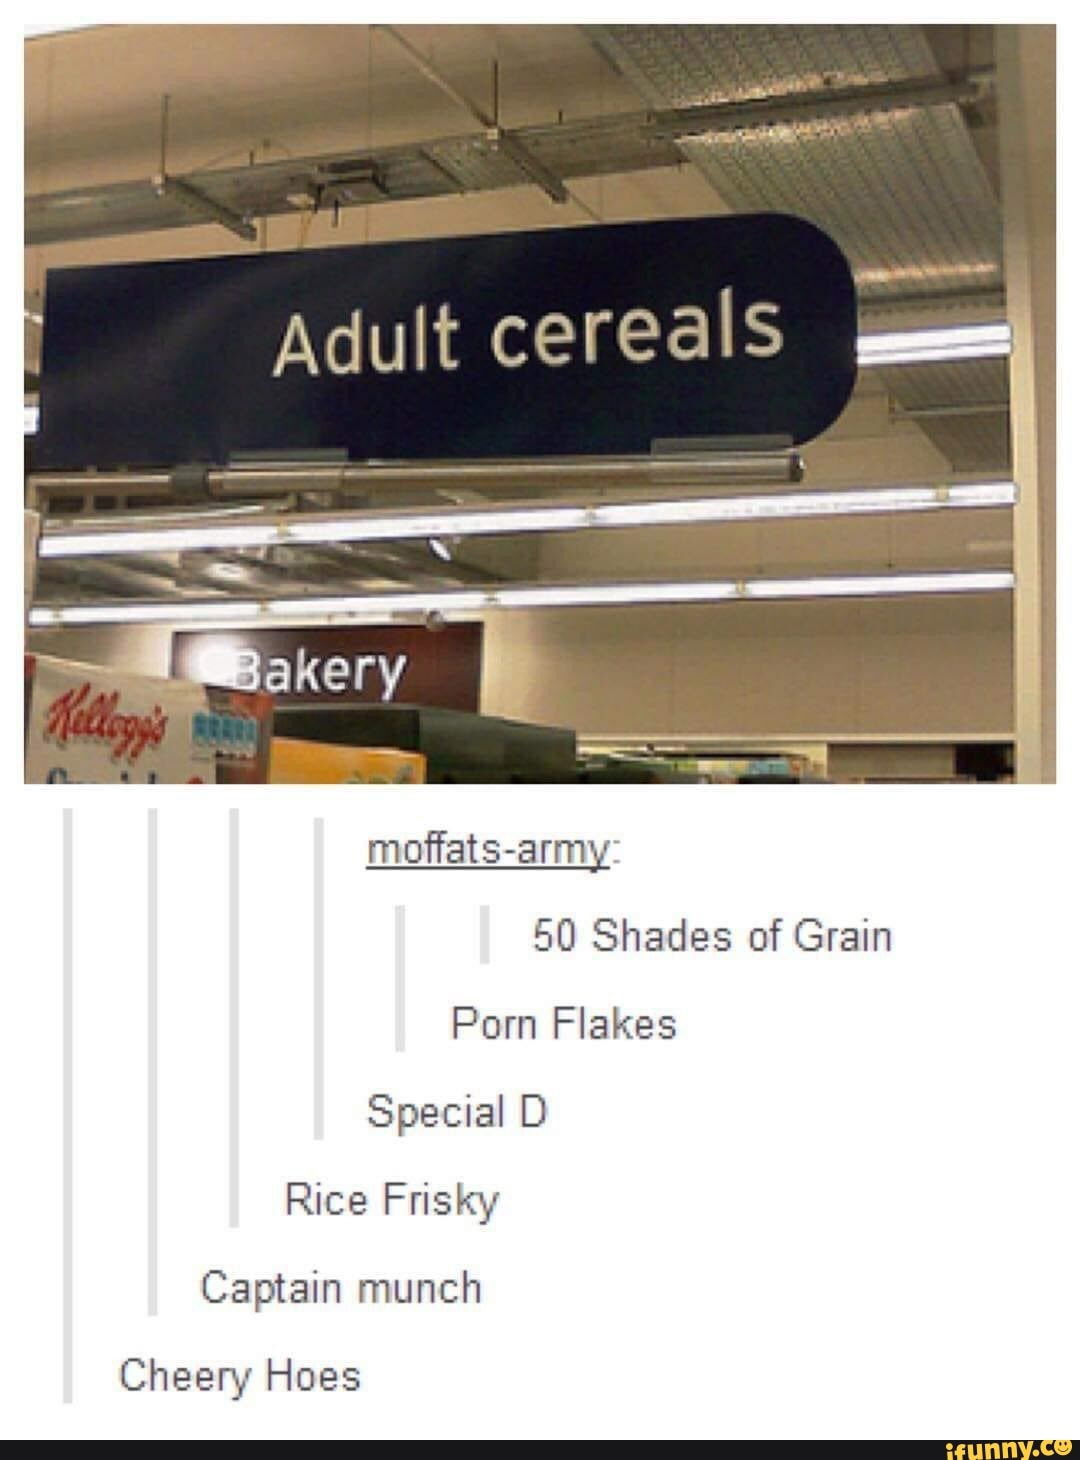 Grain Porn - Adult cereals moffats-army: 50 Shades of Grain Porn Flakes Special D Rice  Frisky Captain munch Cheery Hoes - iFunny Brazil